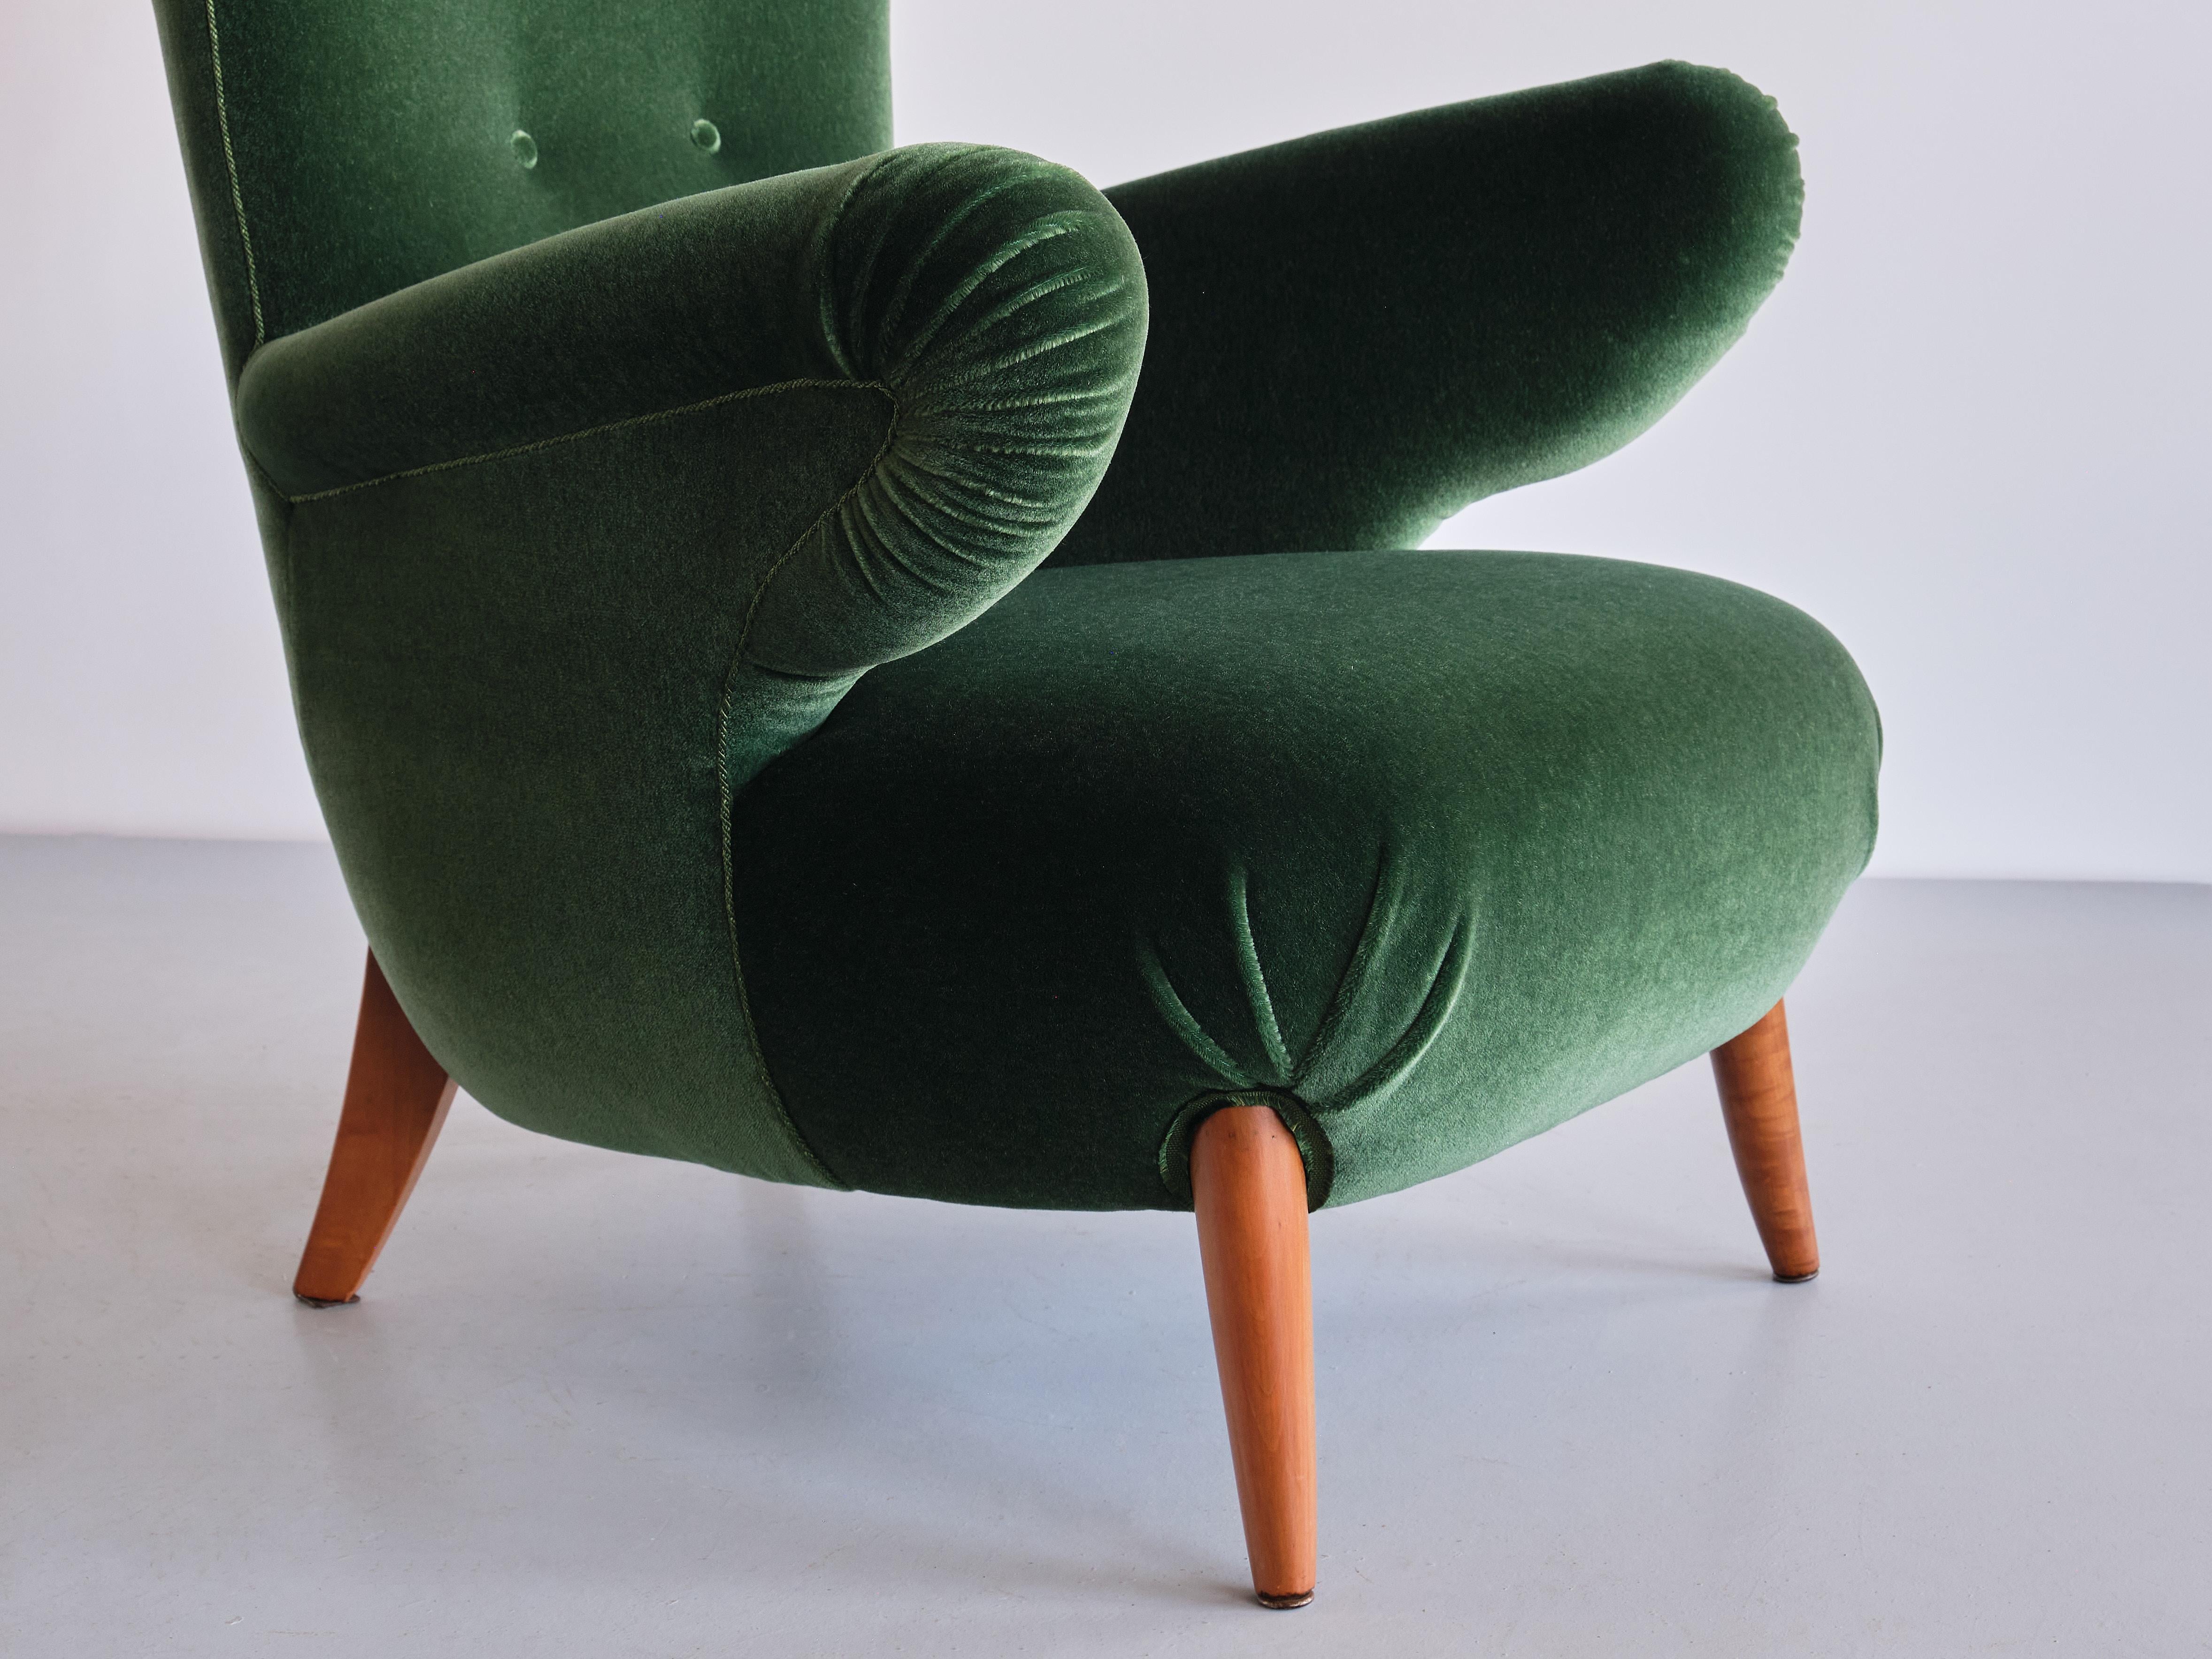 Important Ottorino Aloisio Wingback Chair in Green Mohair, Colli, Italy, 1957 For Sale 2